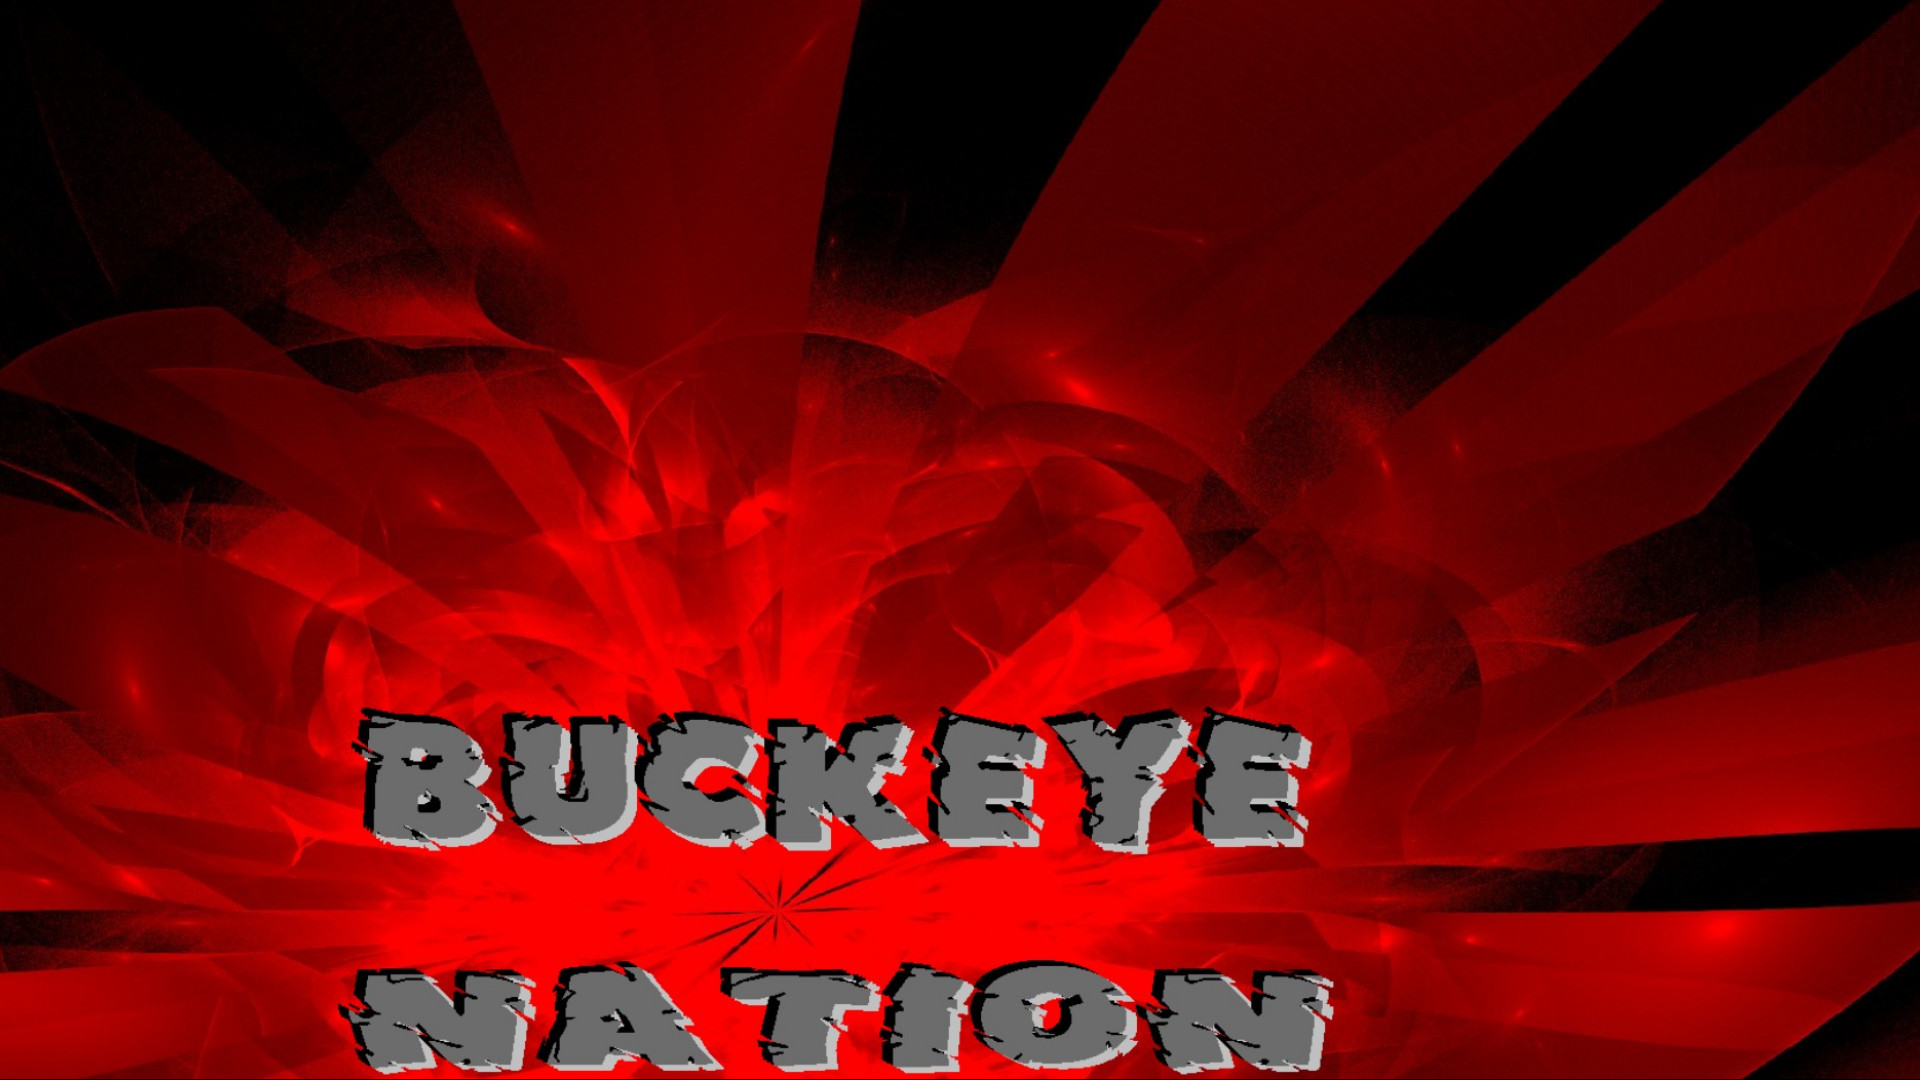 1920x1080 Ohio State Buckeyes images BUCKEYE NATION ON AN ABSTRACT HD wallpaper and  background photos